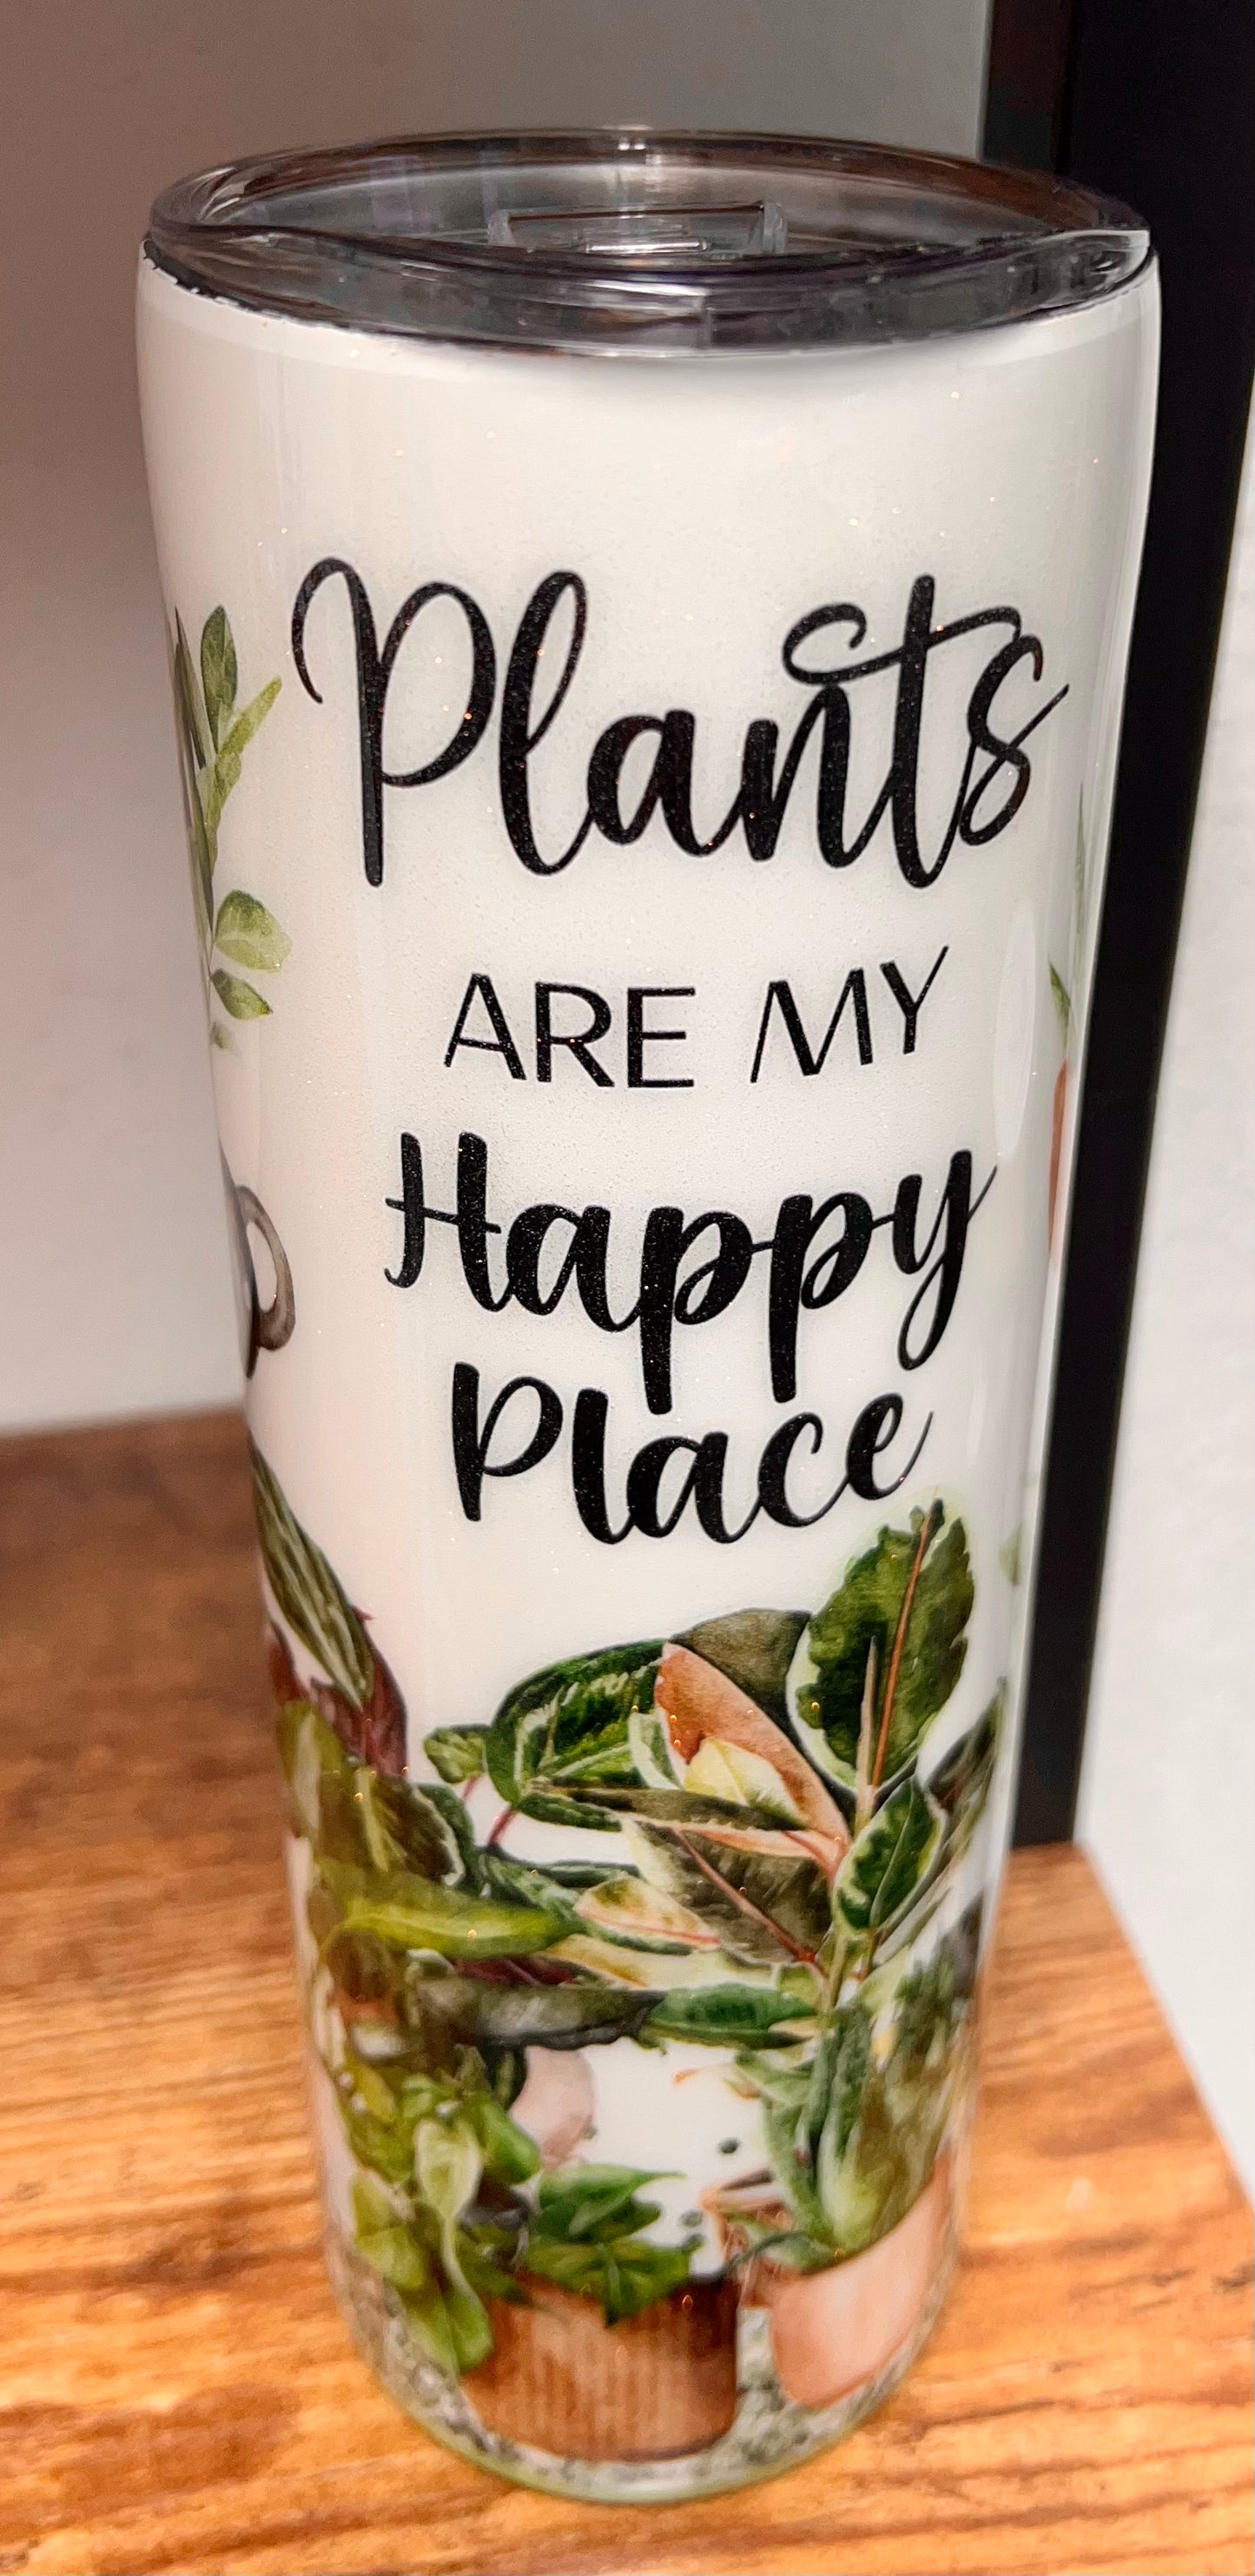 Plants are my Happy Place